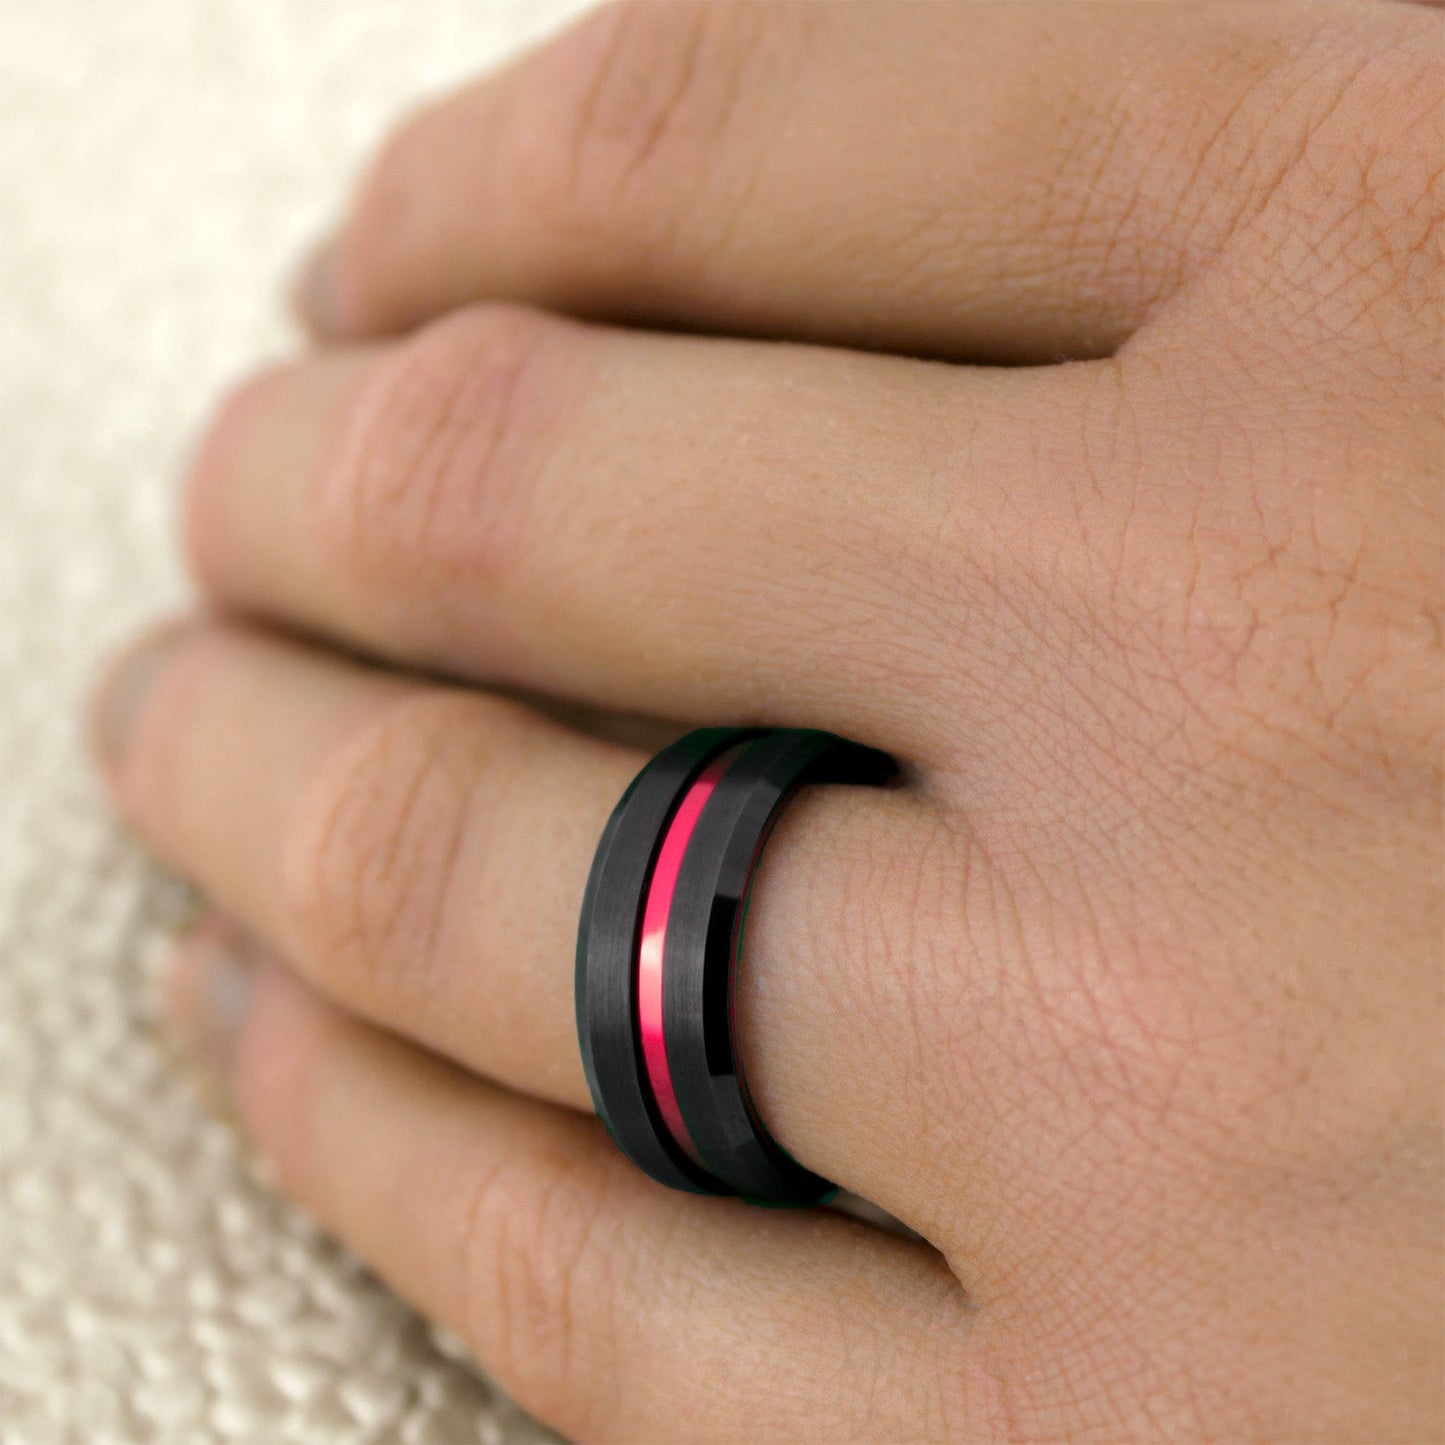 Black Tungsten Men's Wedding Band with Red Groove